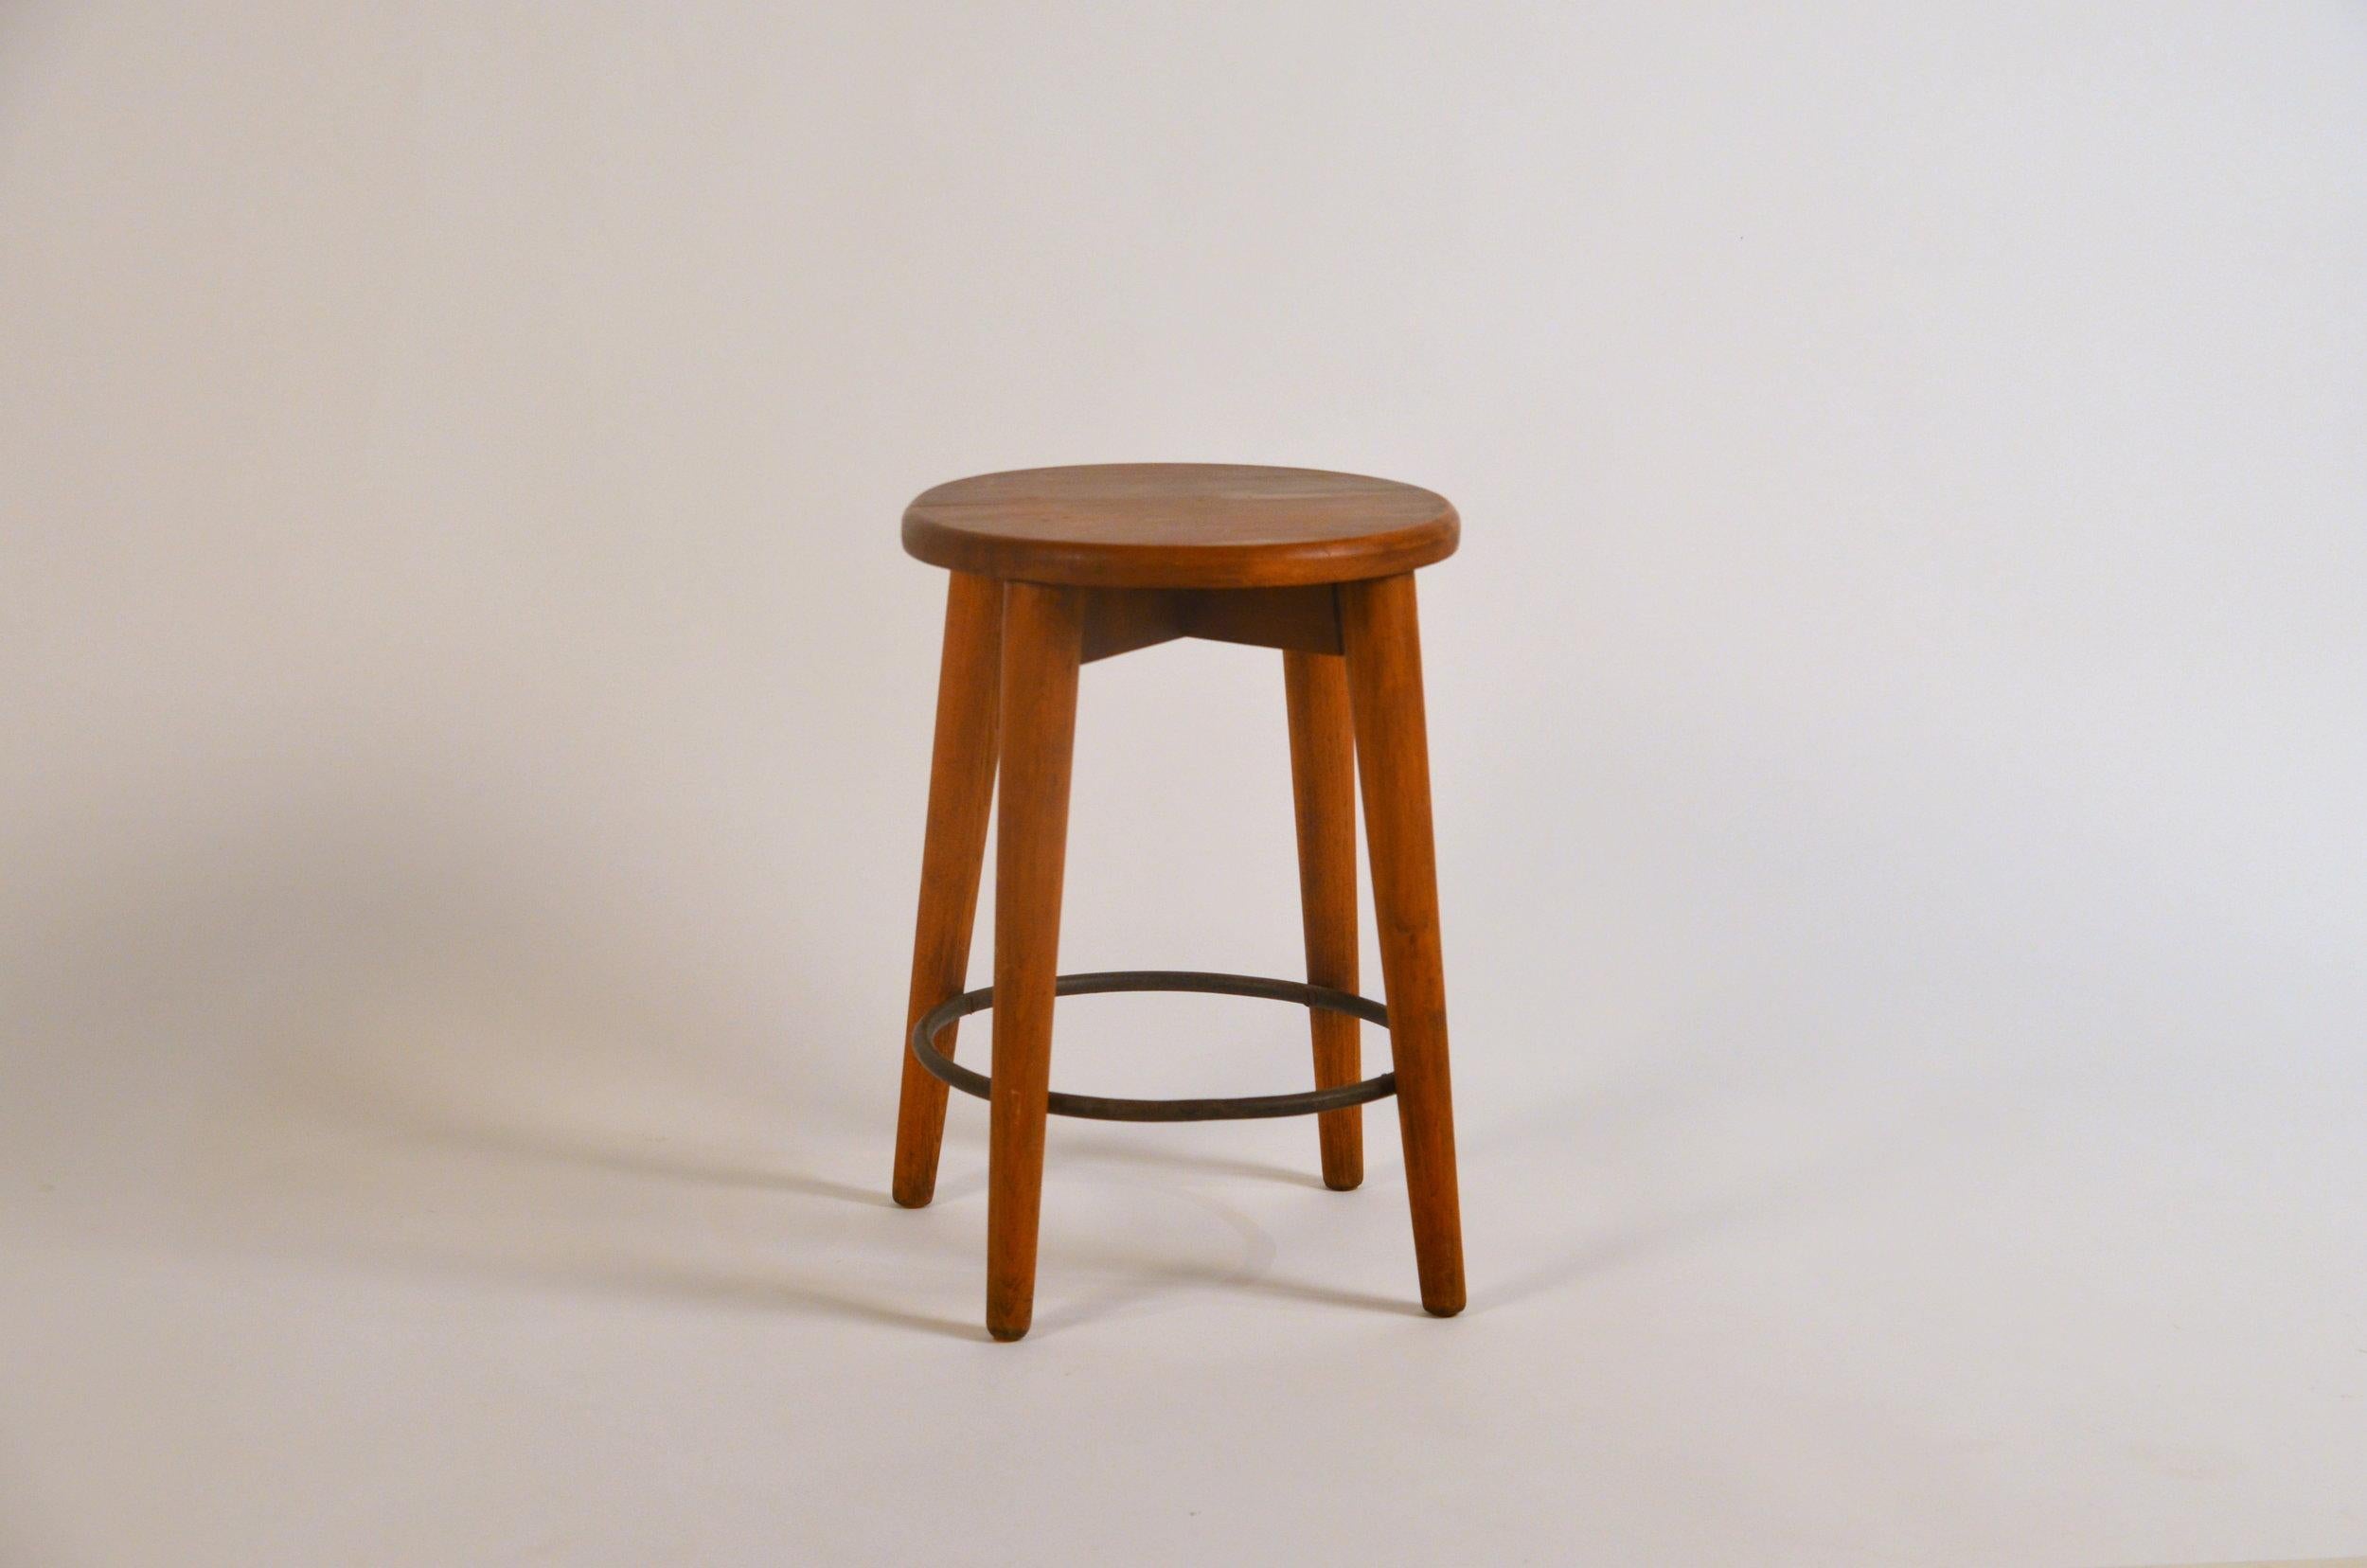 French Reconstruction period patinated oak stool.

Great example of French 